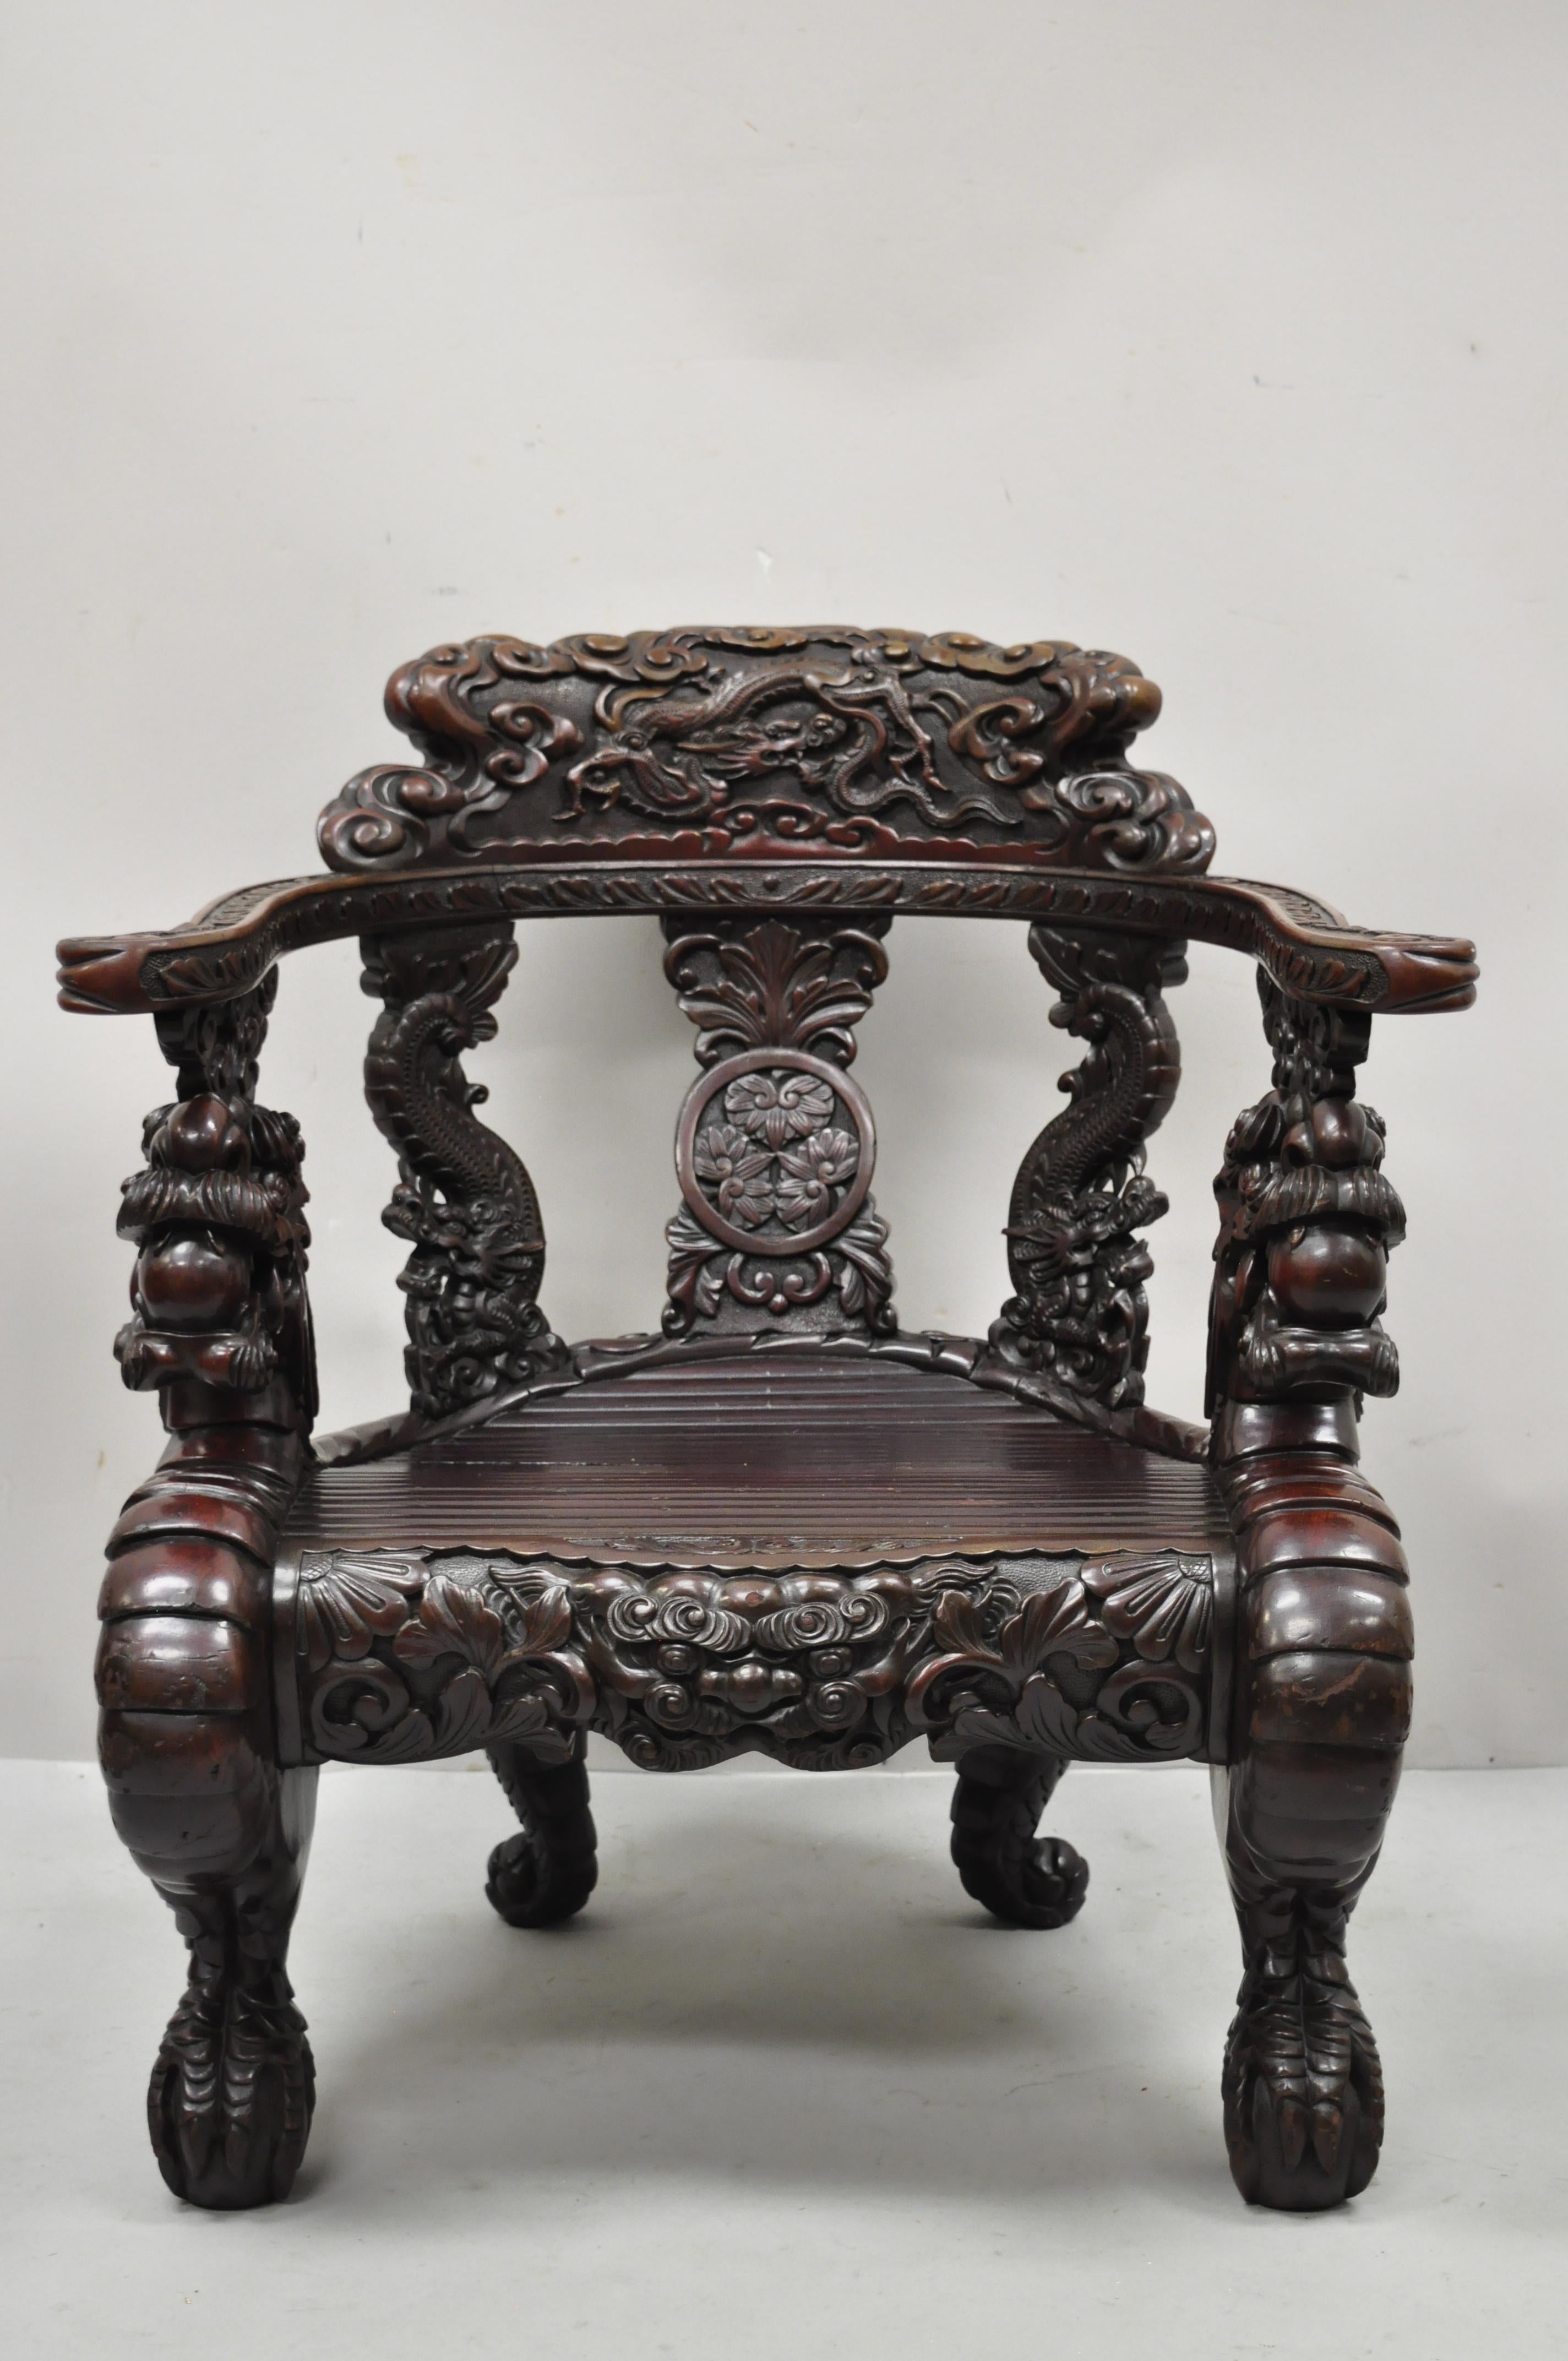 Antique Japanese Meiji Period Dragon Carved Hardwood Lounge Throne Arm Chair. Item features finely relief carved dragons throughout, large dragon and ball and claw legs, remarkably detailed all around, heavy solid wood construction, very nice